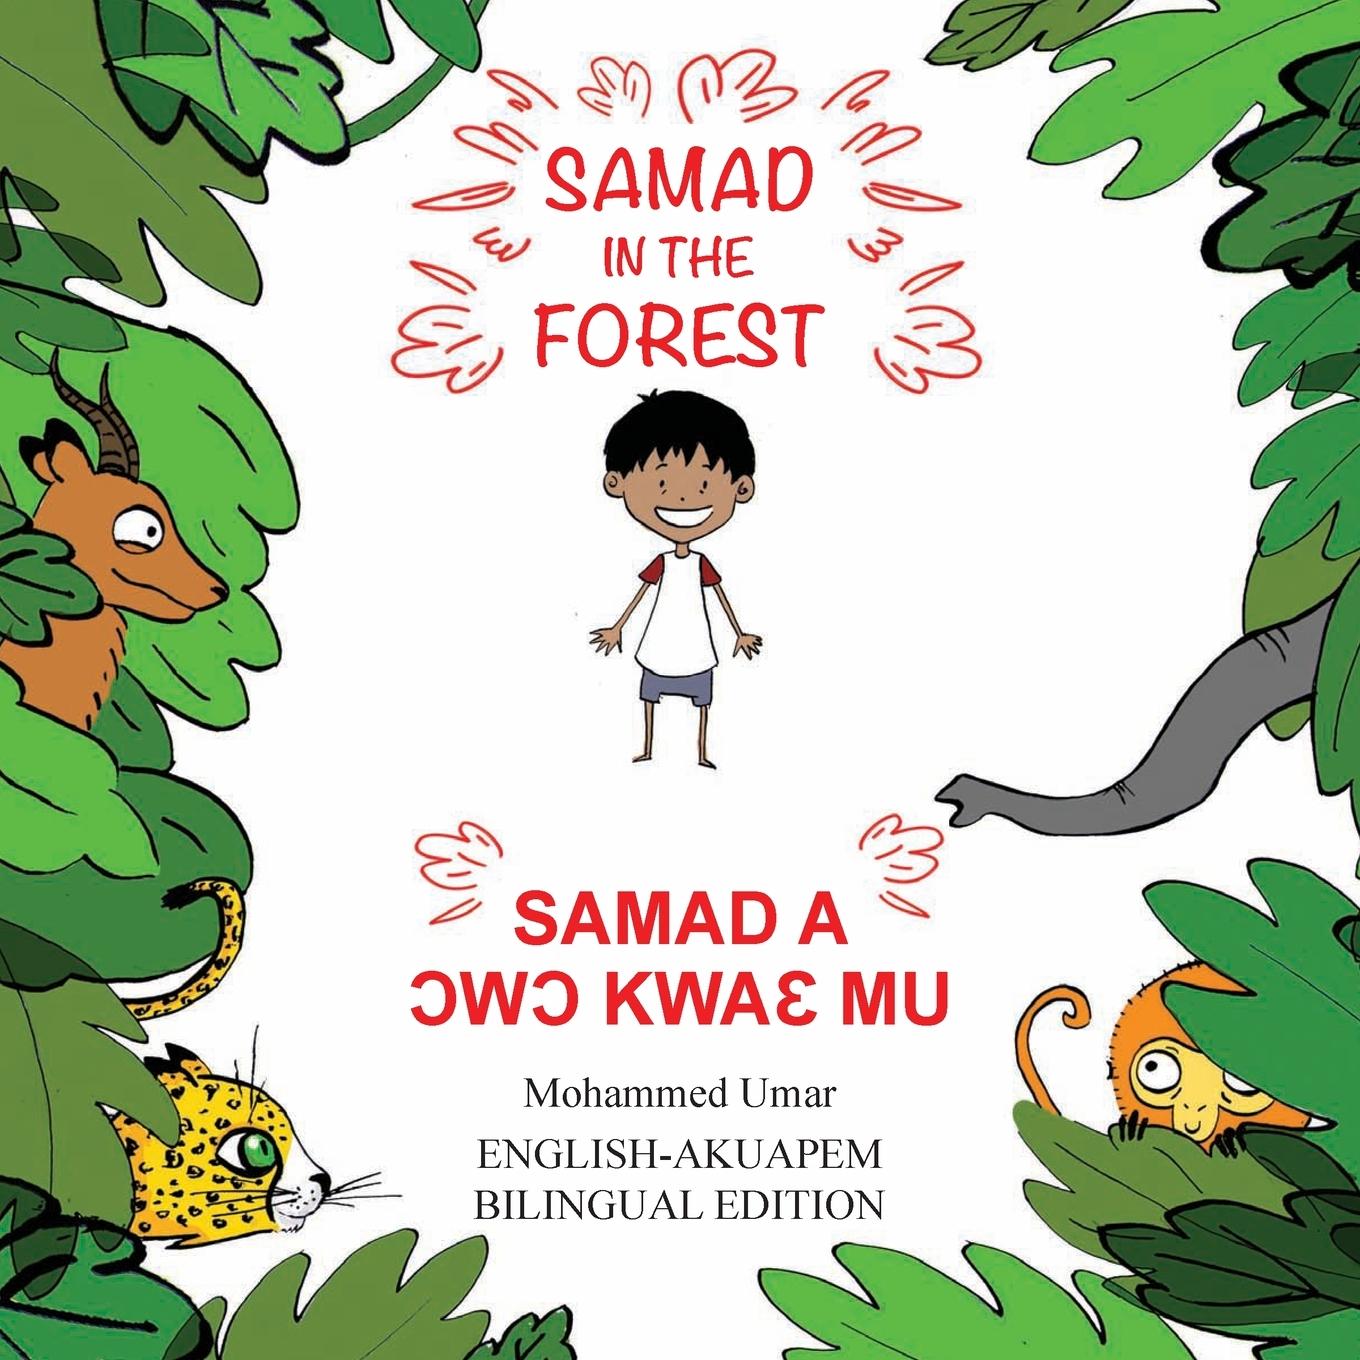 Book Samad in the Forest: English - Akuapem Bilingual Edition 